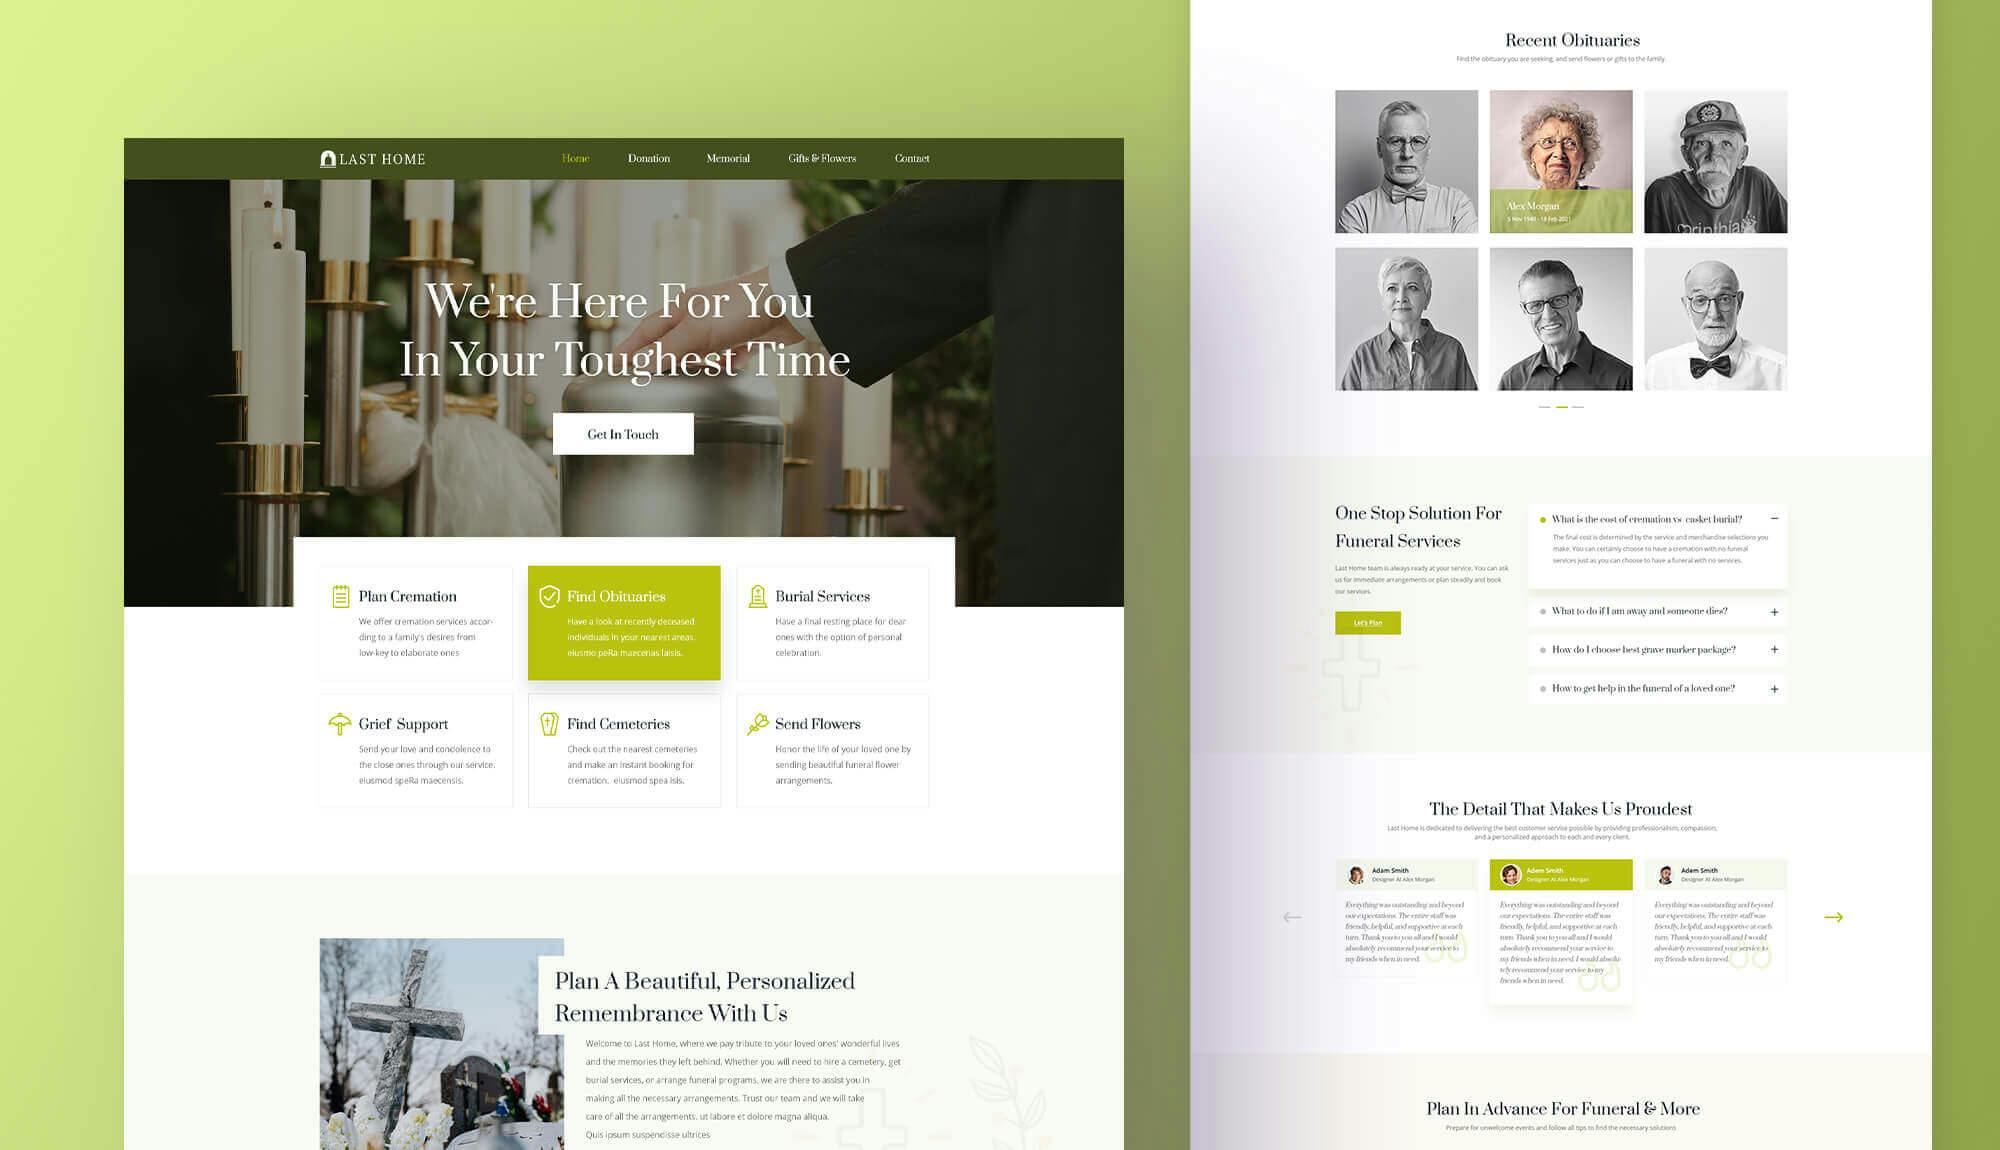 Last Home- Funeral Service Website Template Banner